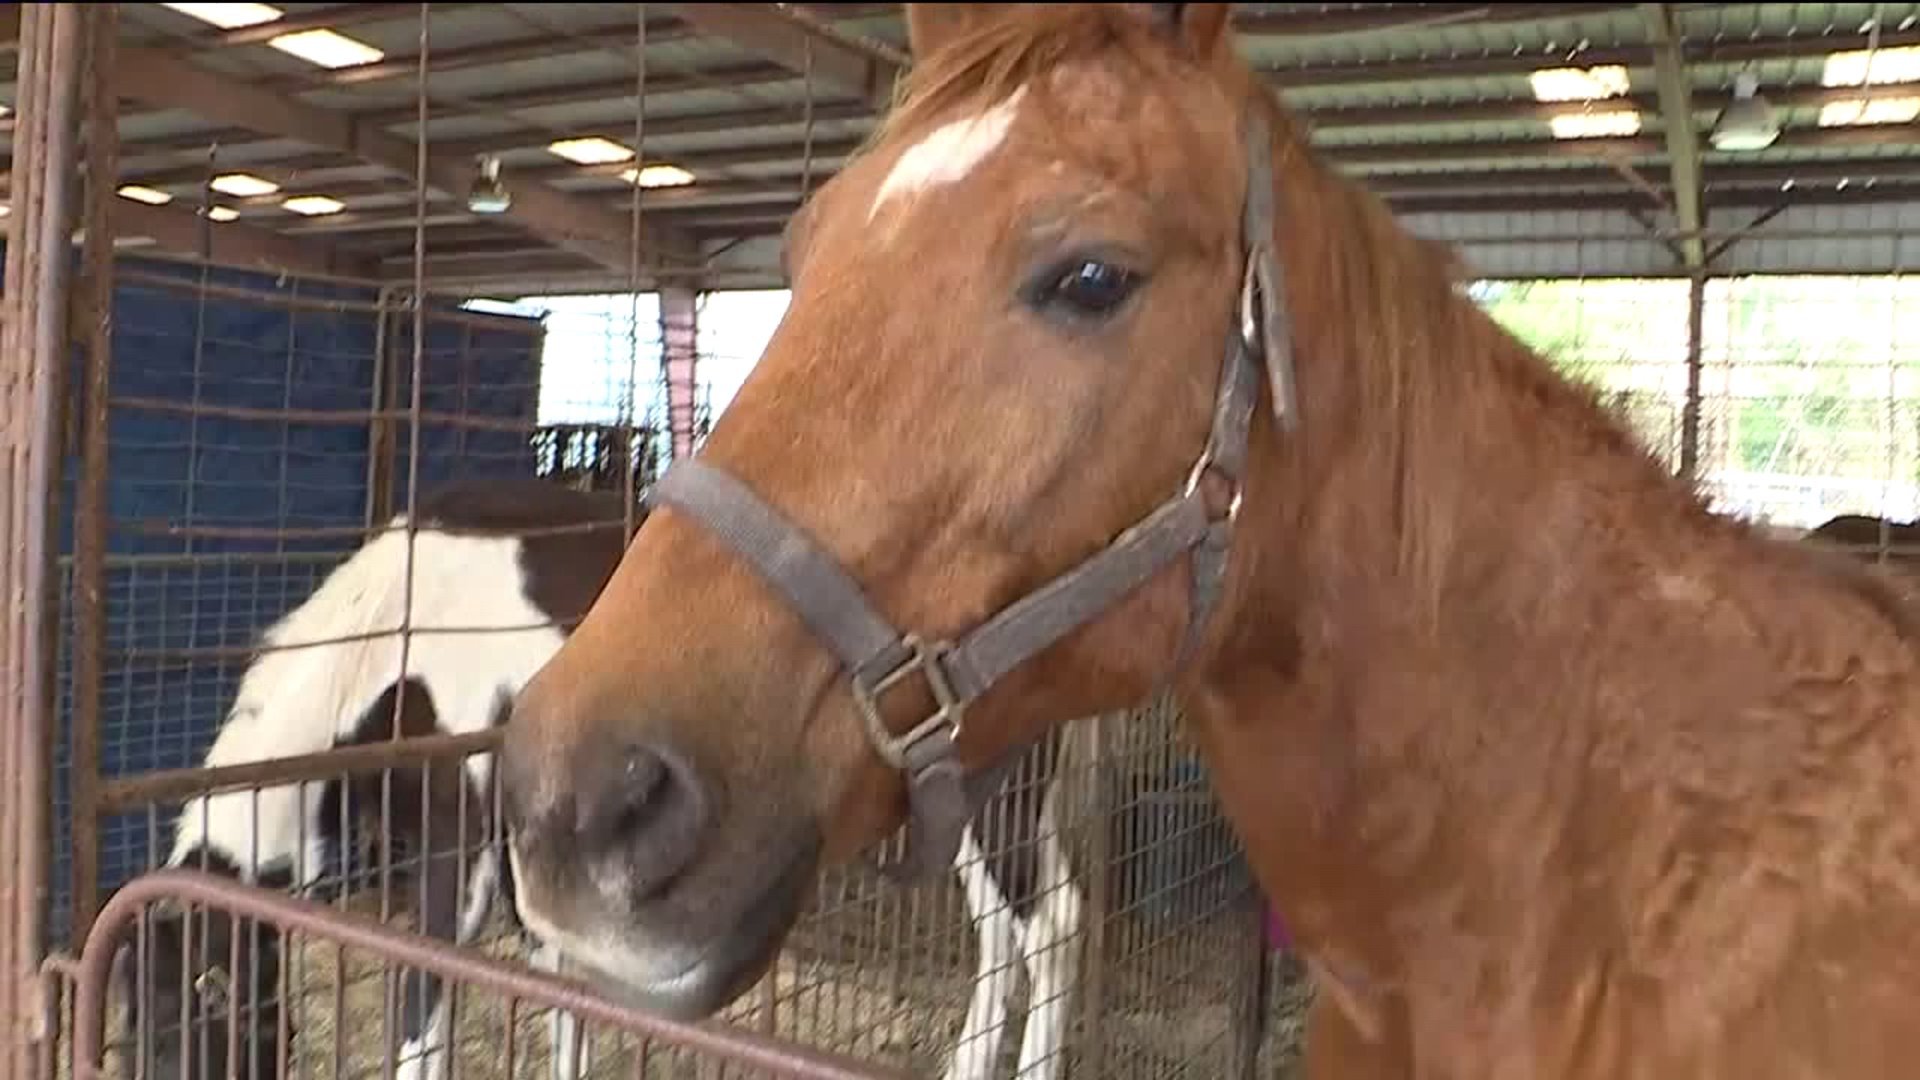 Parade horses put up for adoption in hopes of avoiding slaughter | WGNO